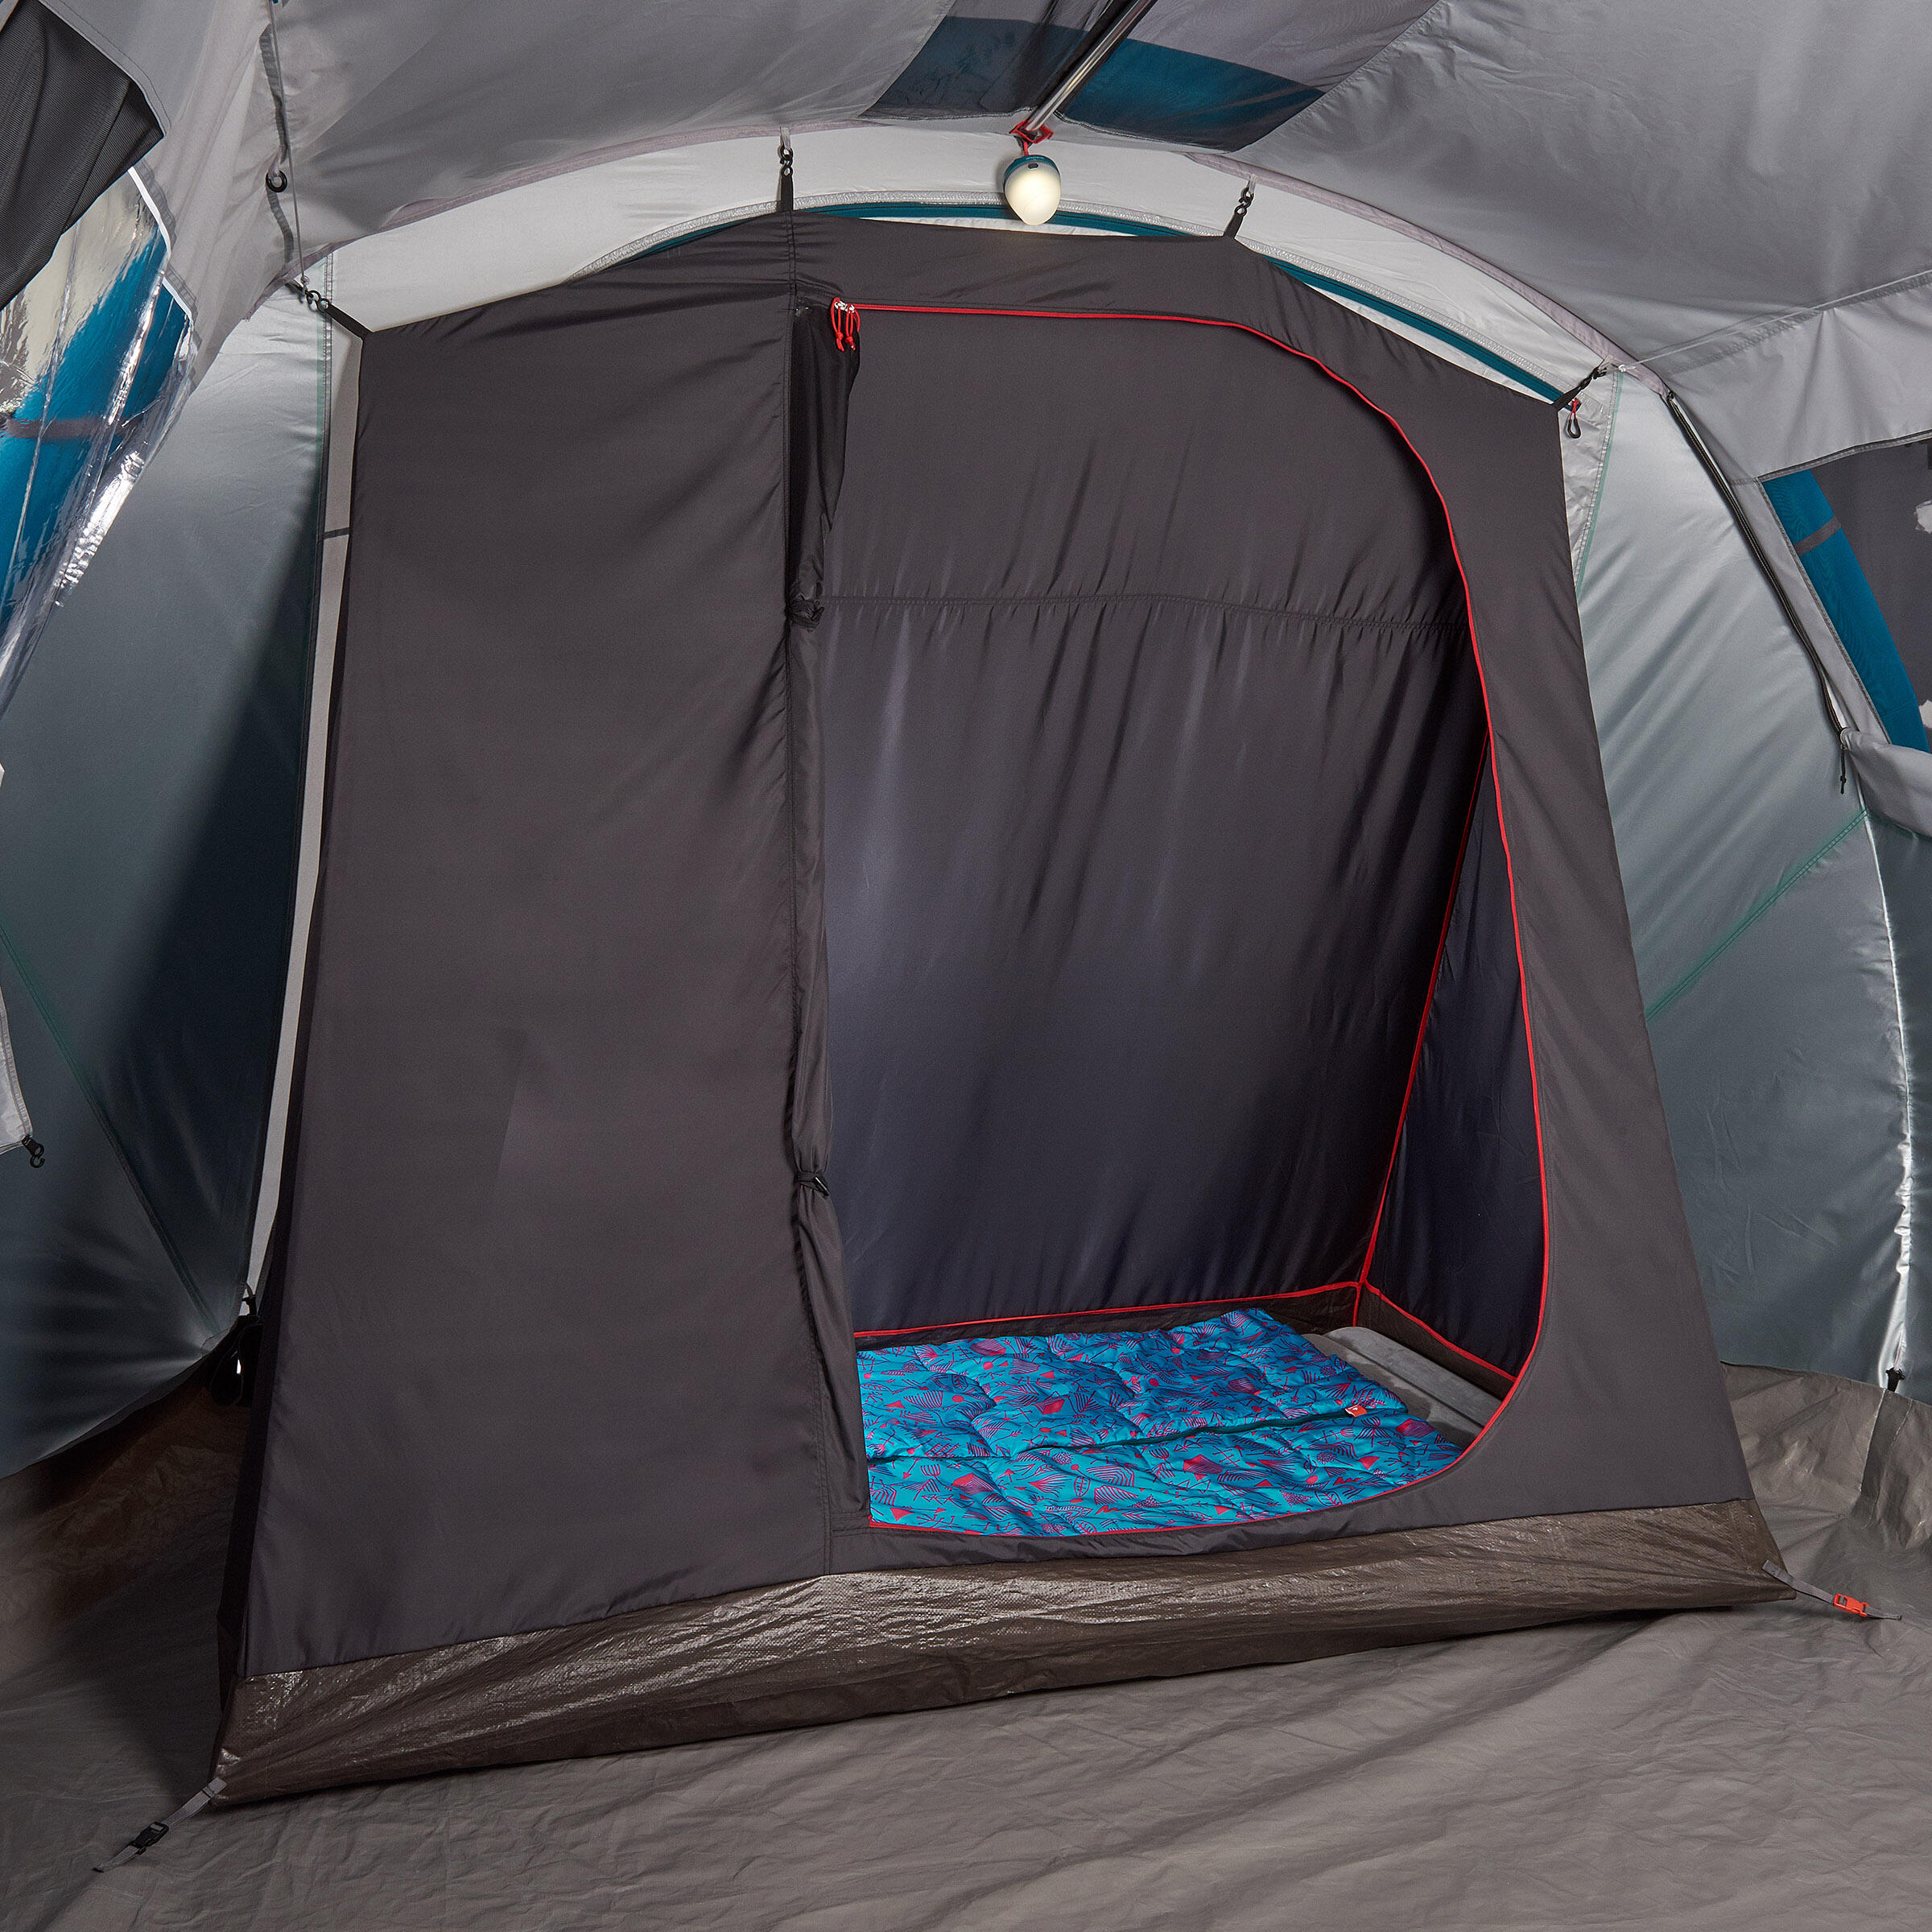 Inflatable Camping Tent - Air Seconds 6 